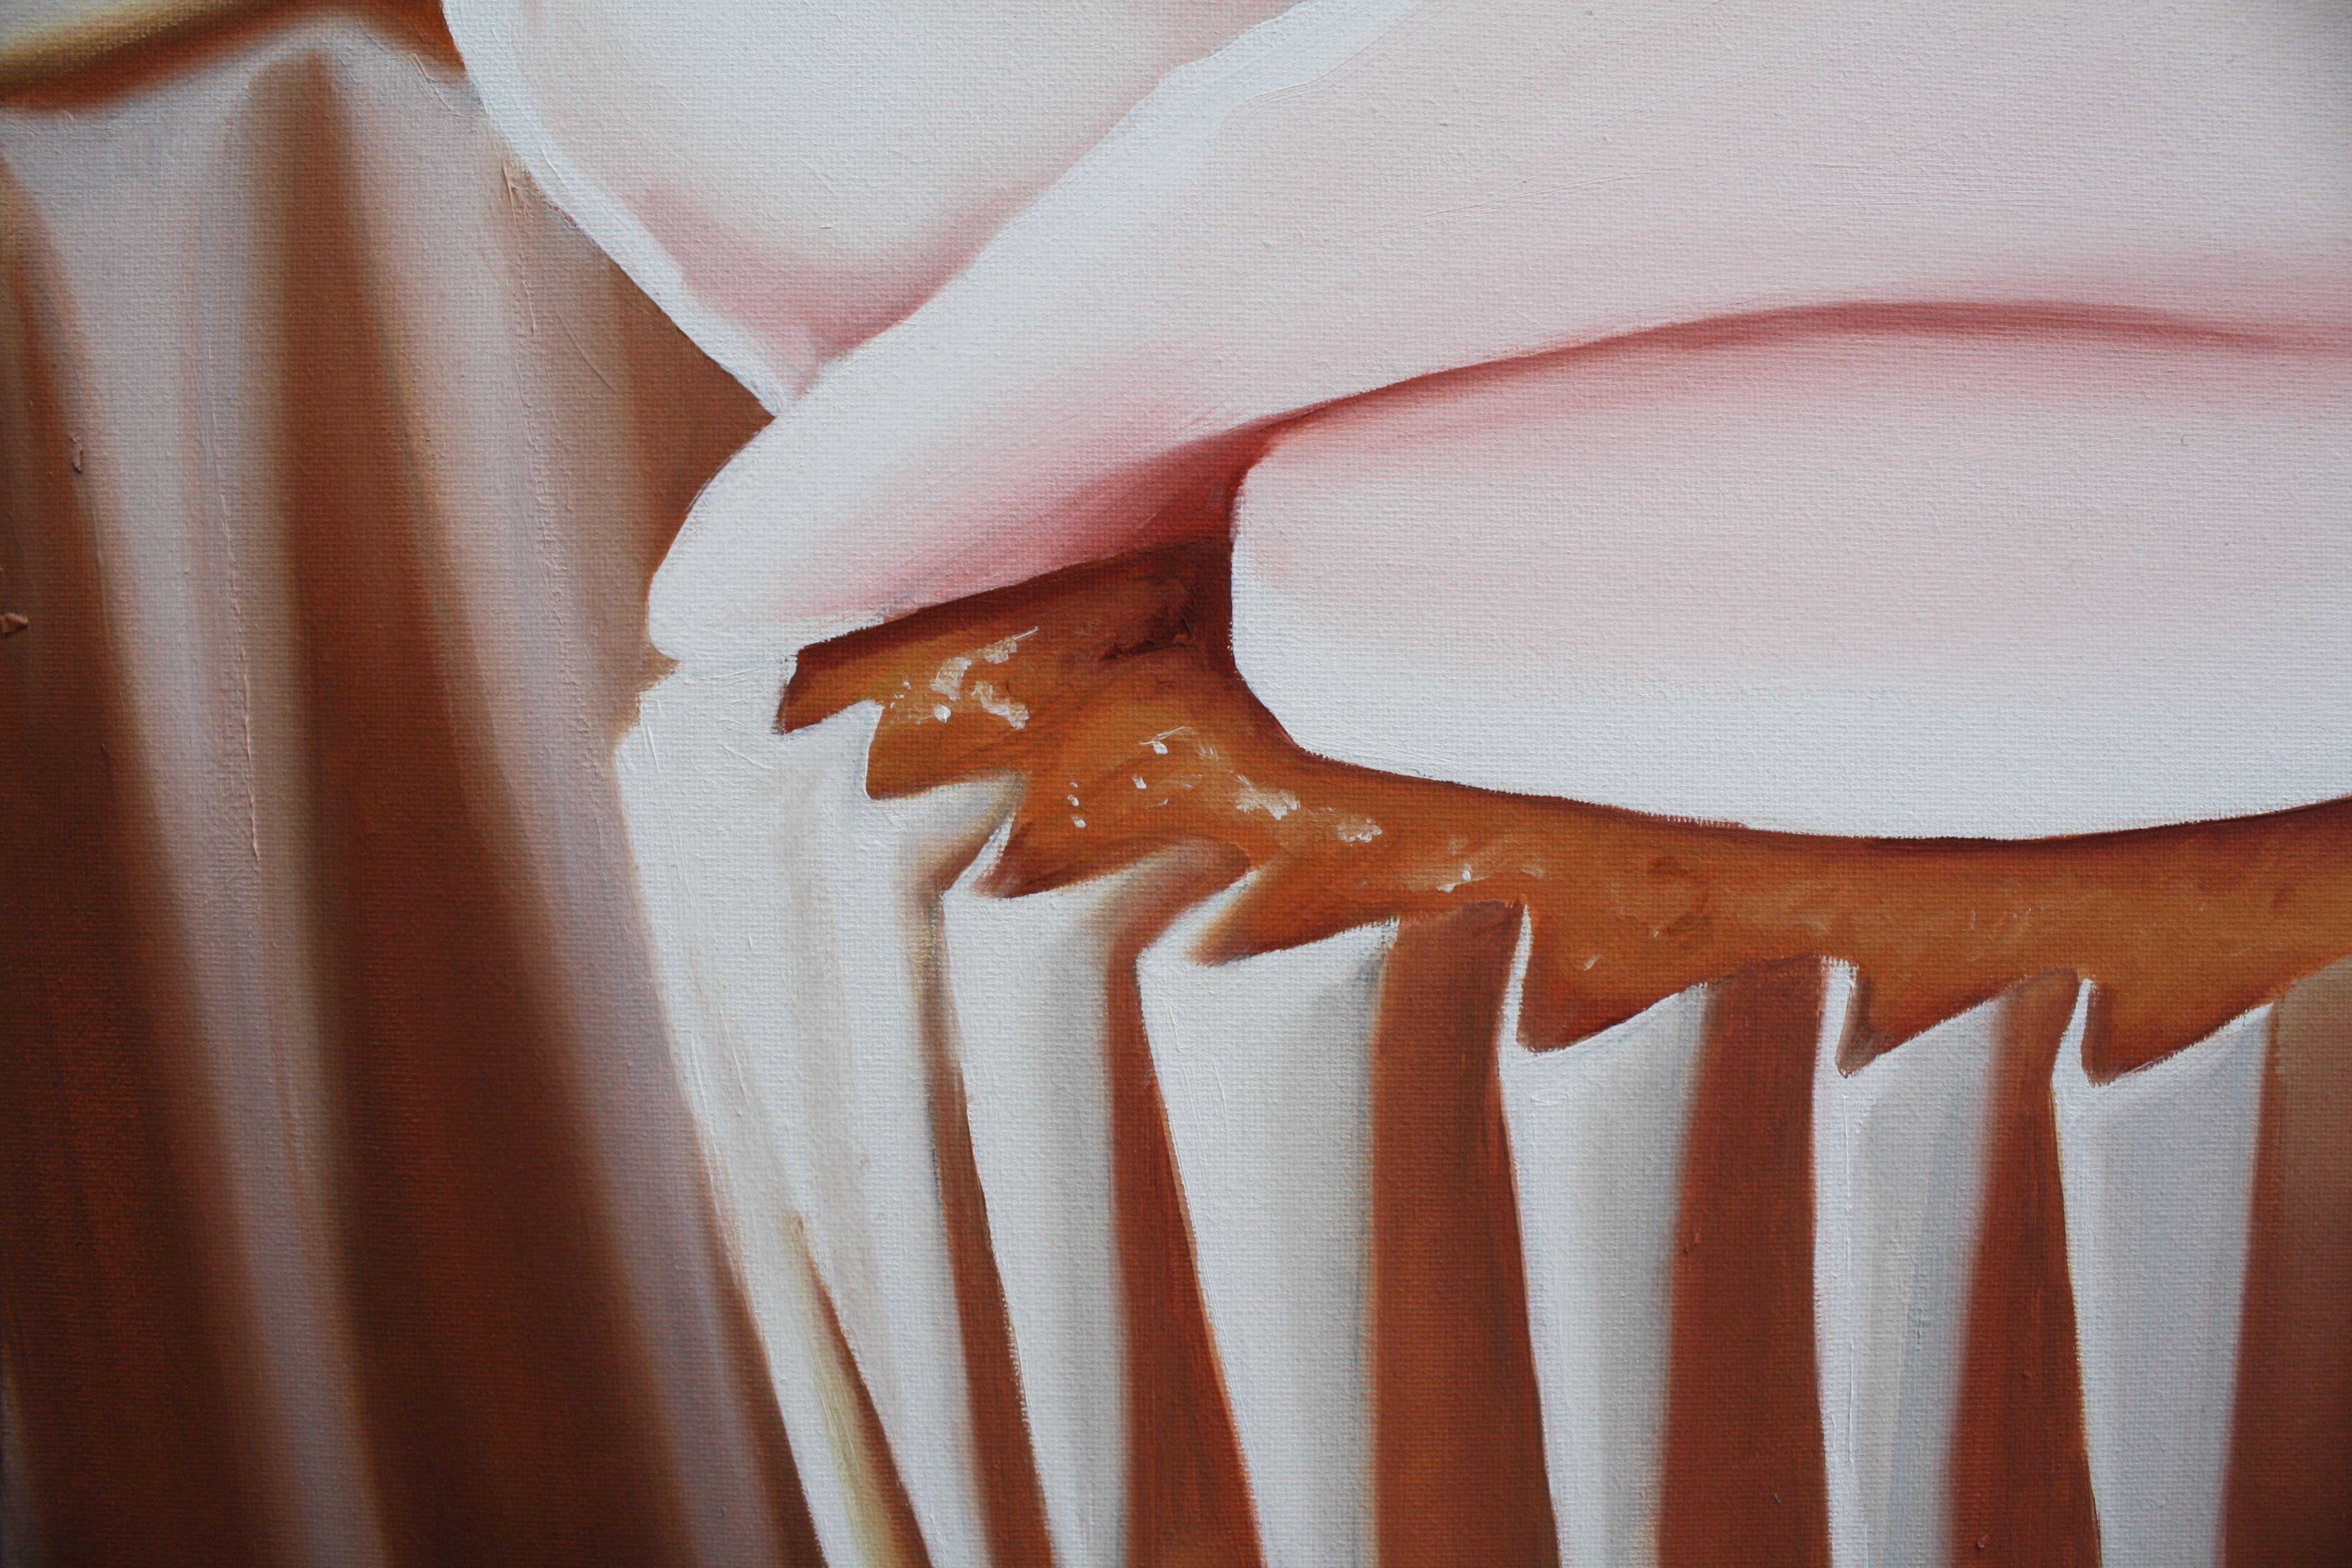 DOLCE FOLLIA, Painting, Oil on Canvas 2